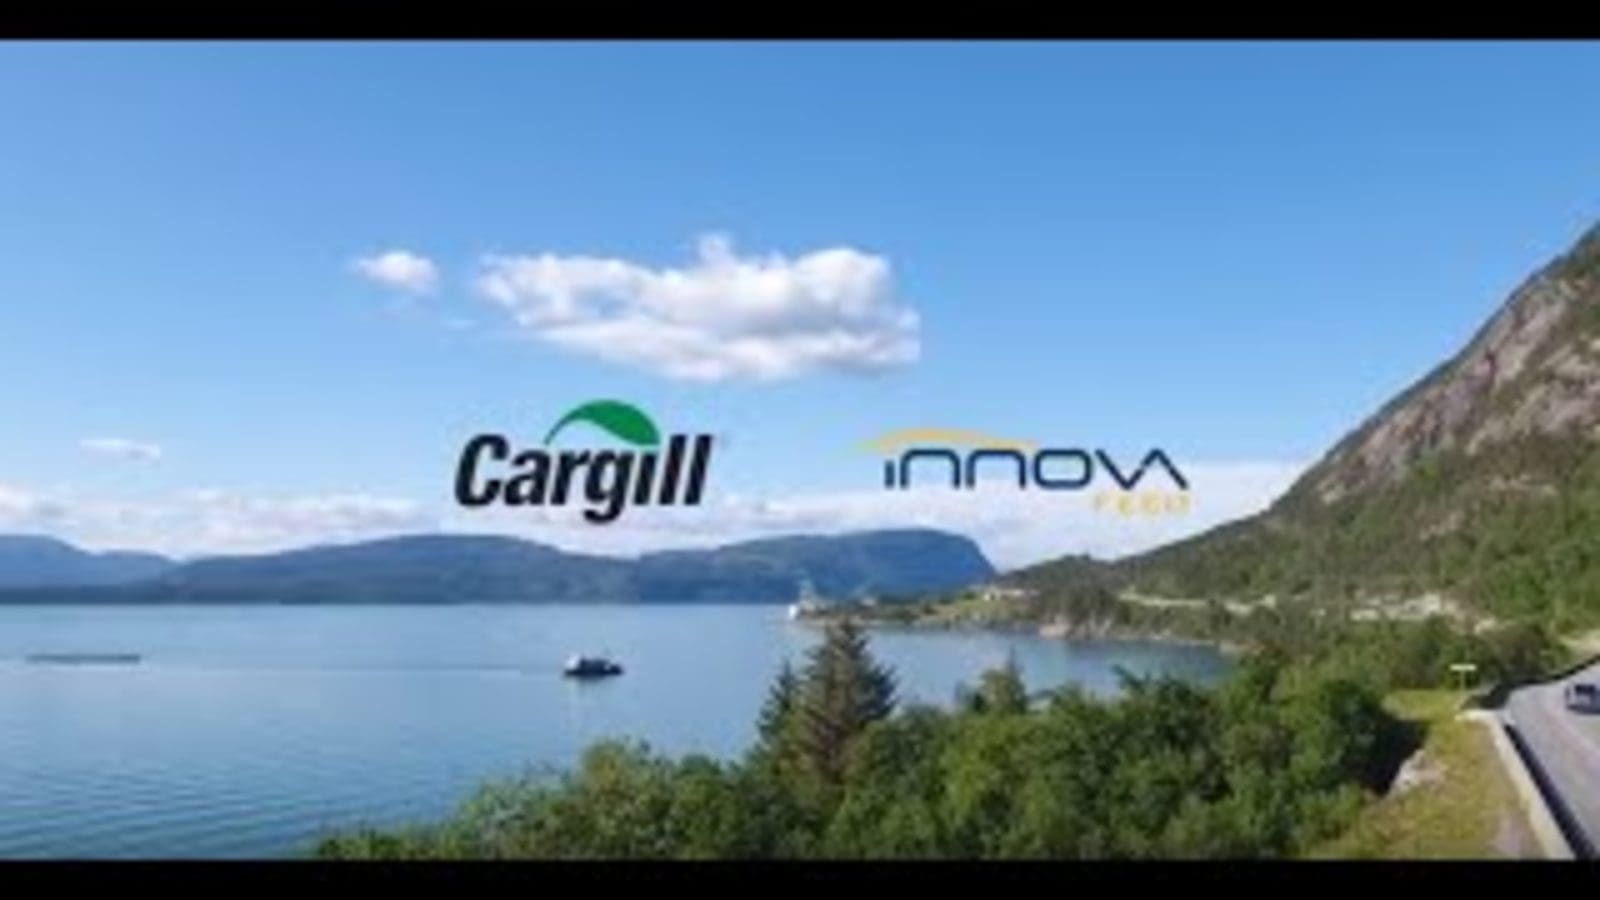 Cargill, Innovafeed extend partnership on insect-based feed